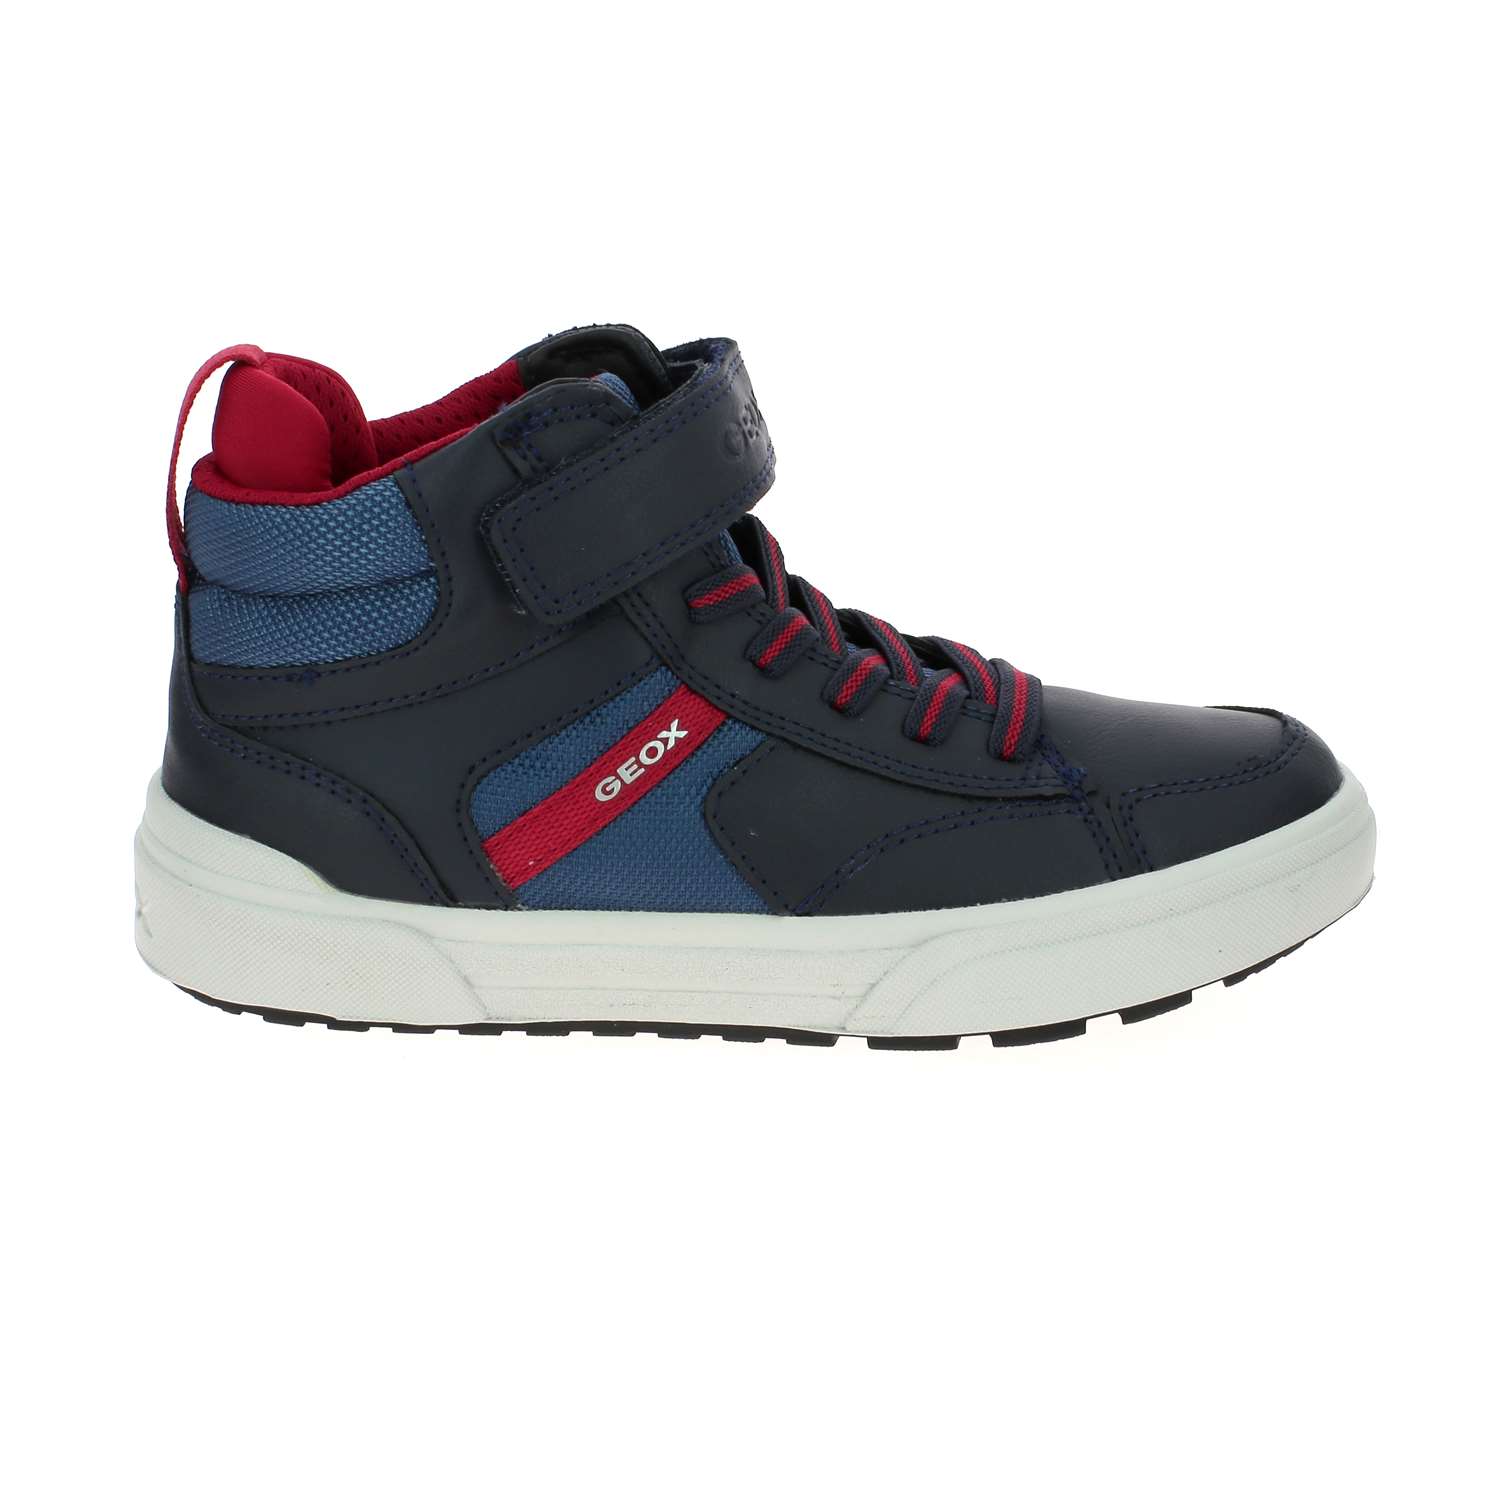 2 - WEEMBLE - GEOX - Chaussures montantes, Baskets - Synthétique, Textile